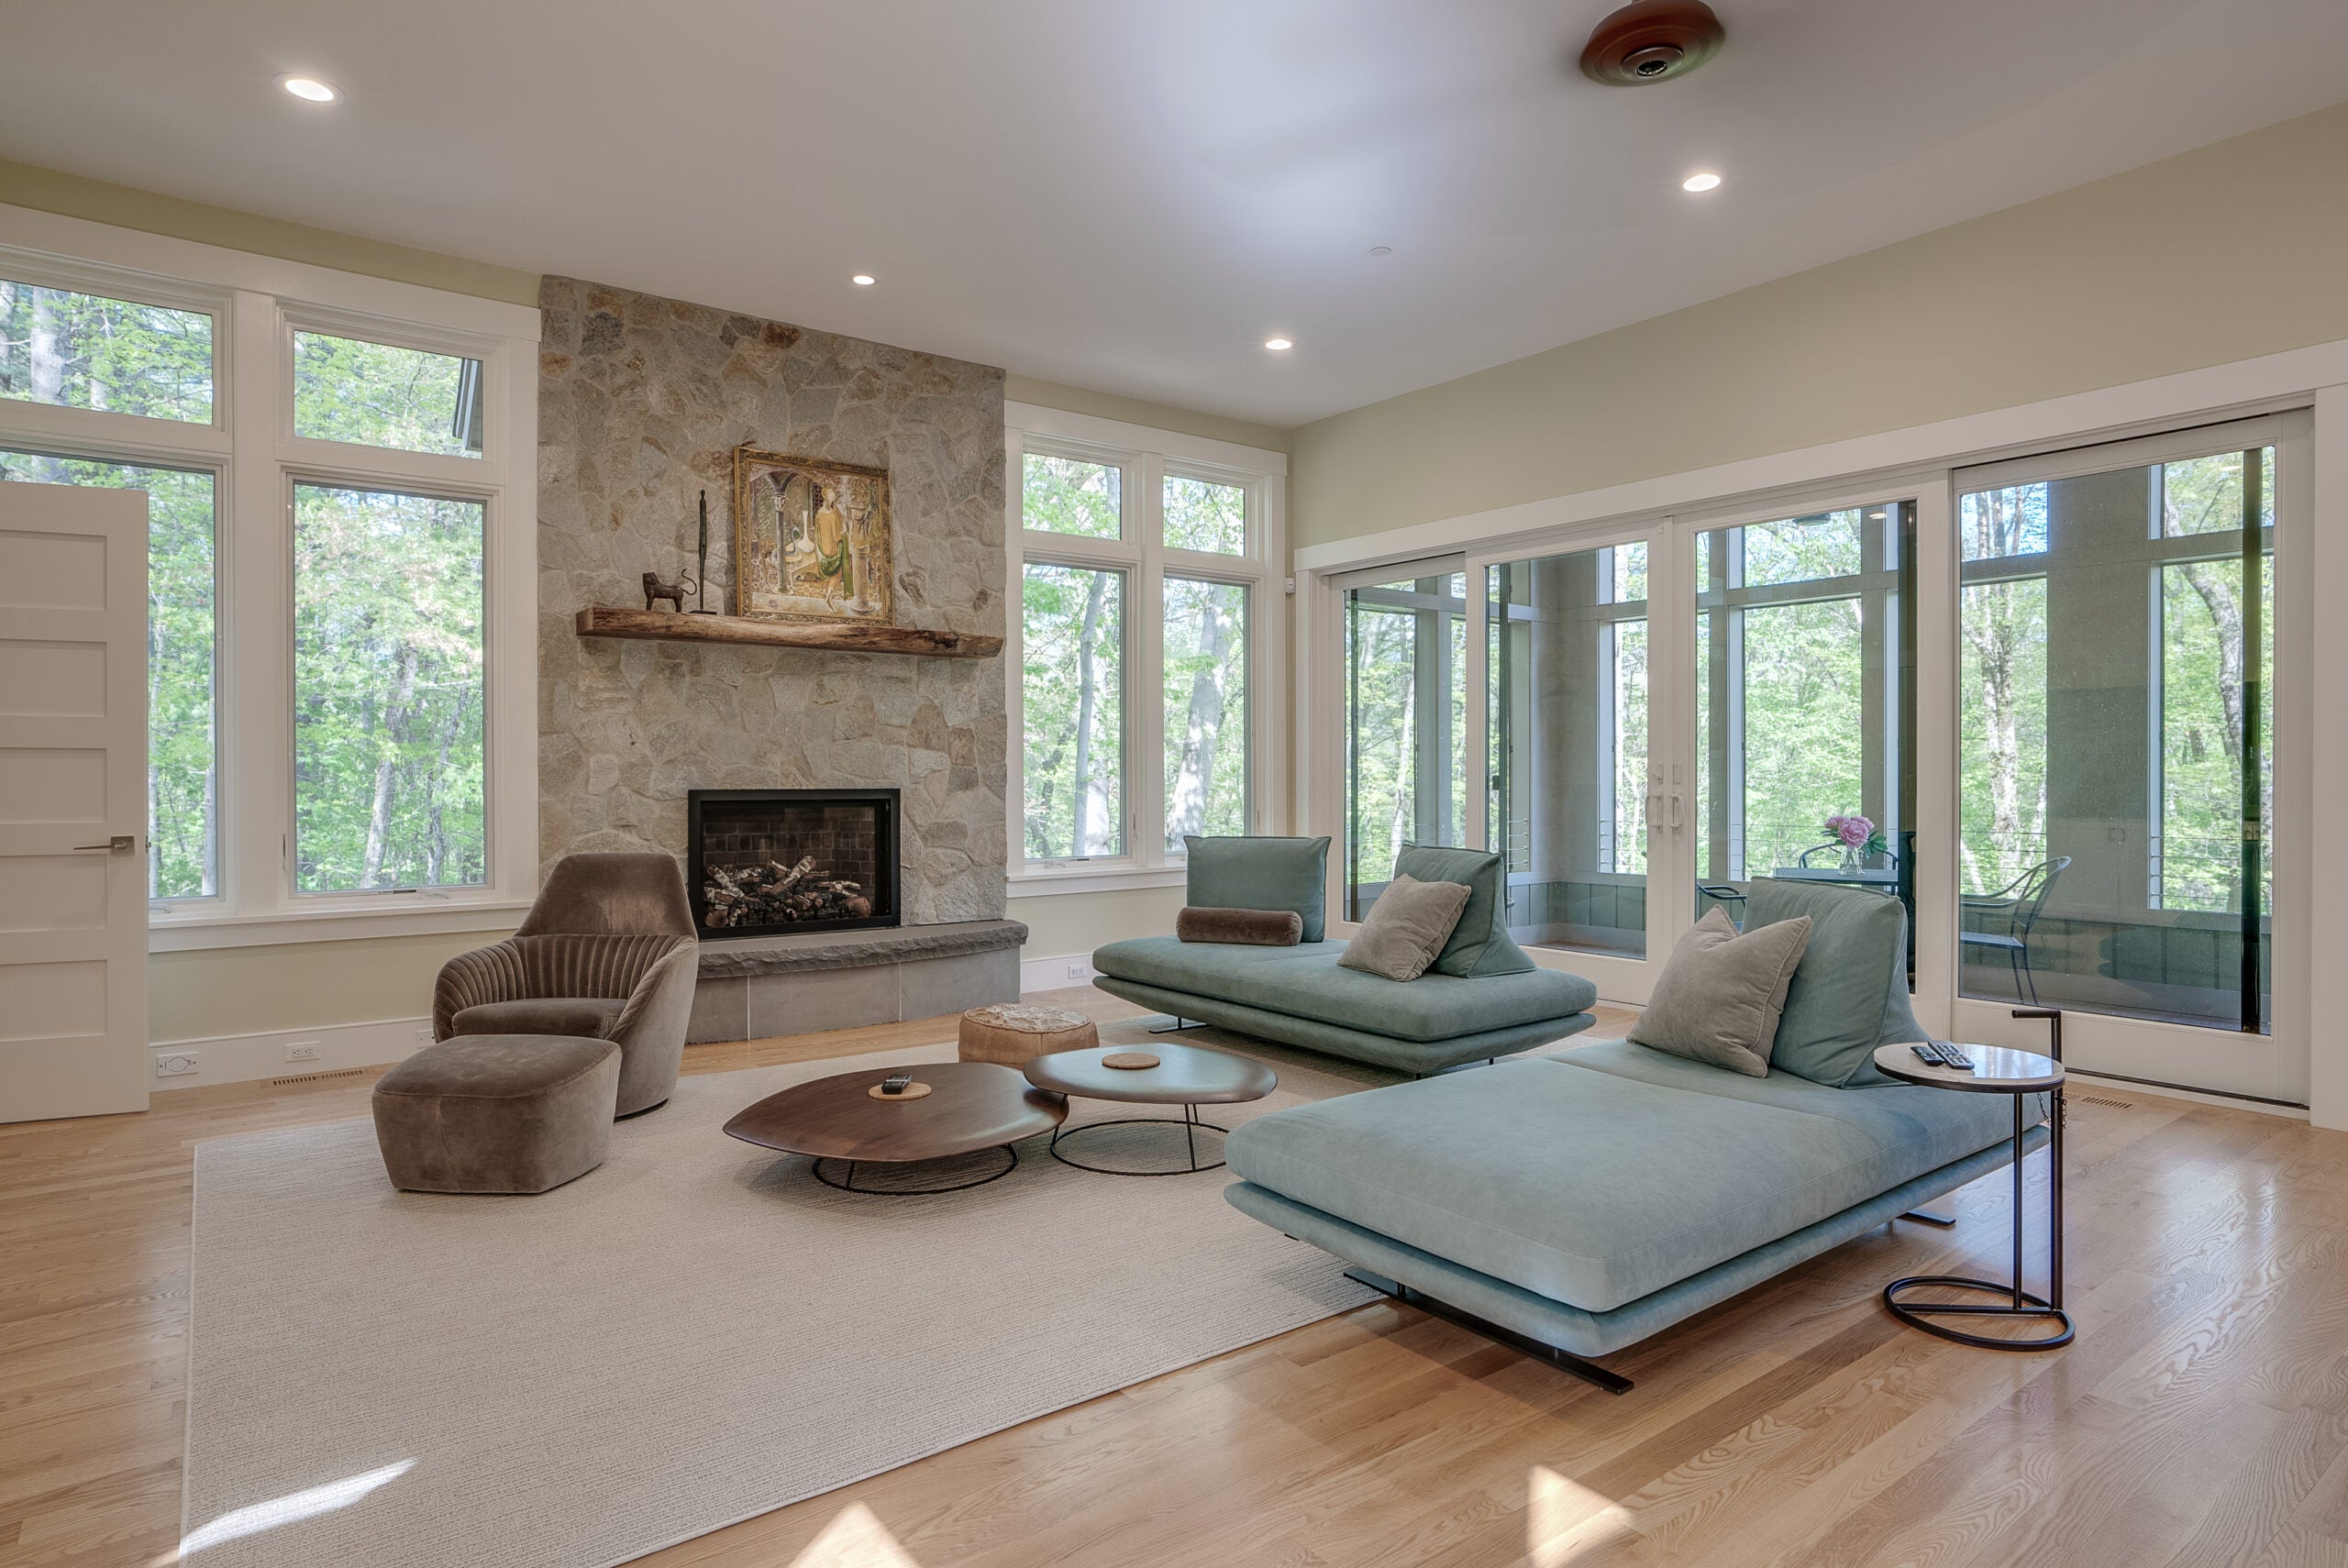 a room with tall windows that extend to the ceiling, hardwood flooring, blue couches with no arms but big pillows, a stone fireplace, a gray armchair with an ottoman, and a rounded, three-tier coffee table.